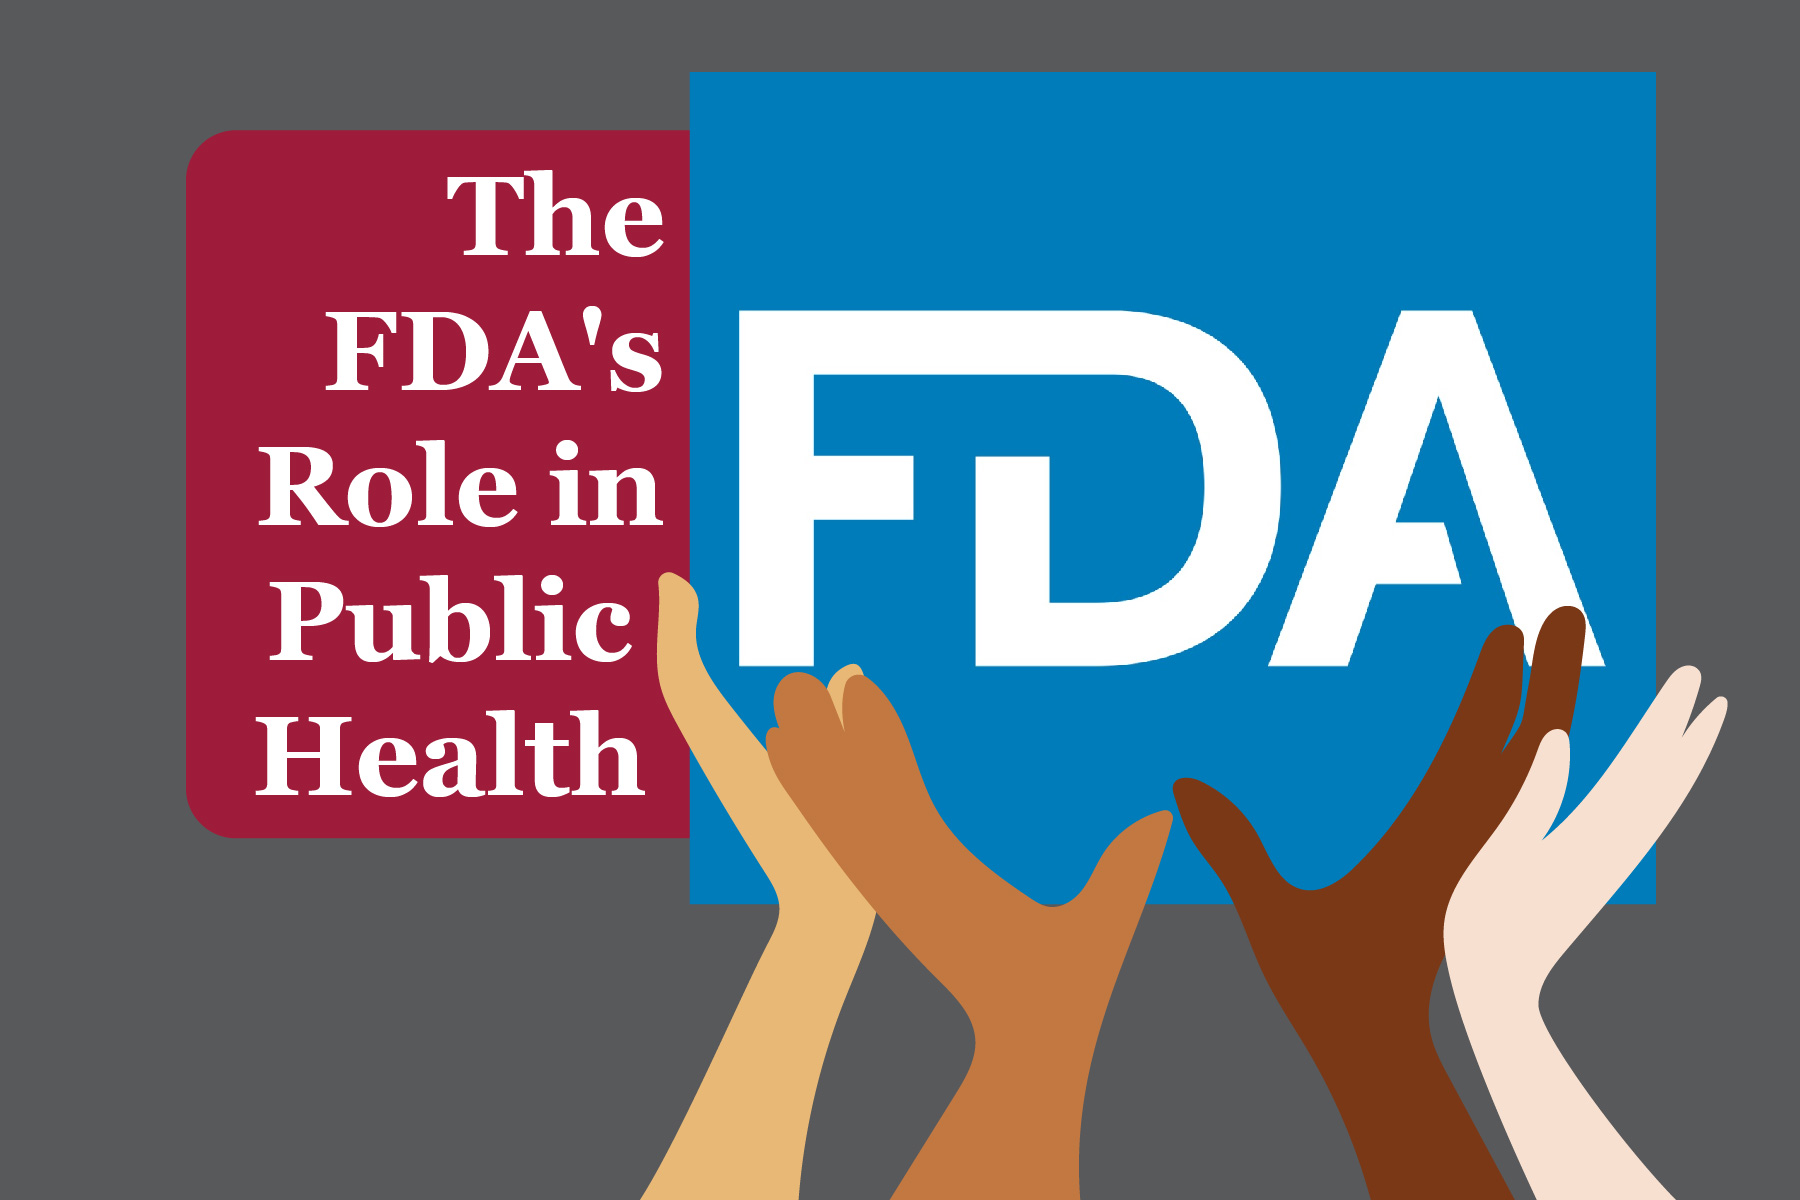 FDA and the important role they play in medical devices and pharmaceuticals and public health